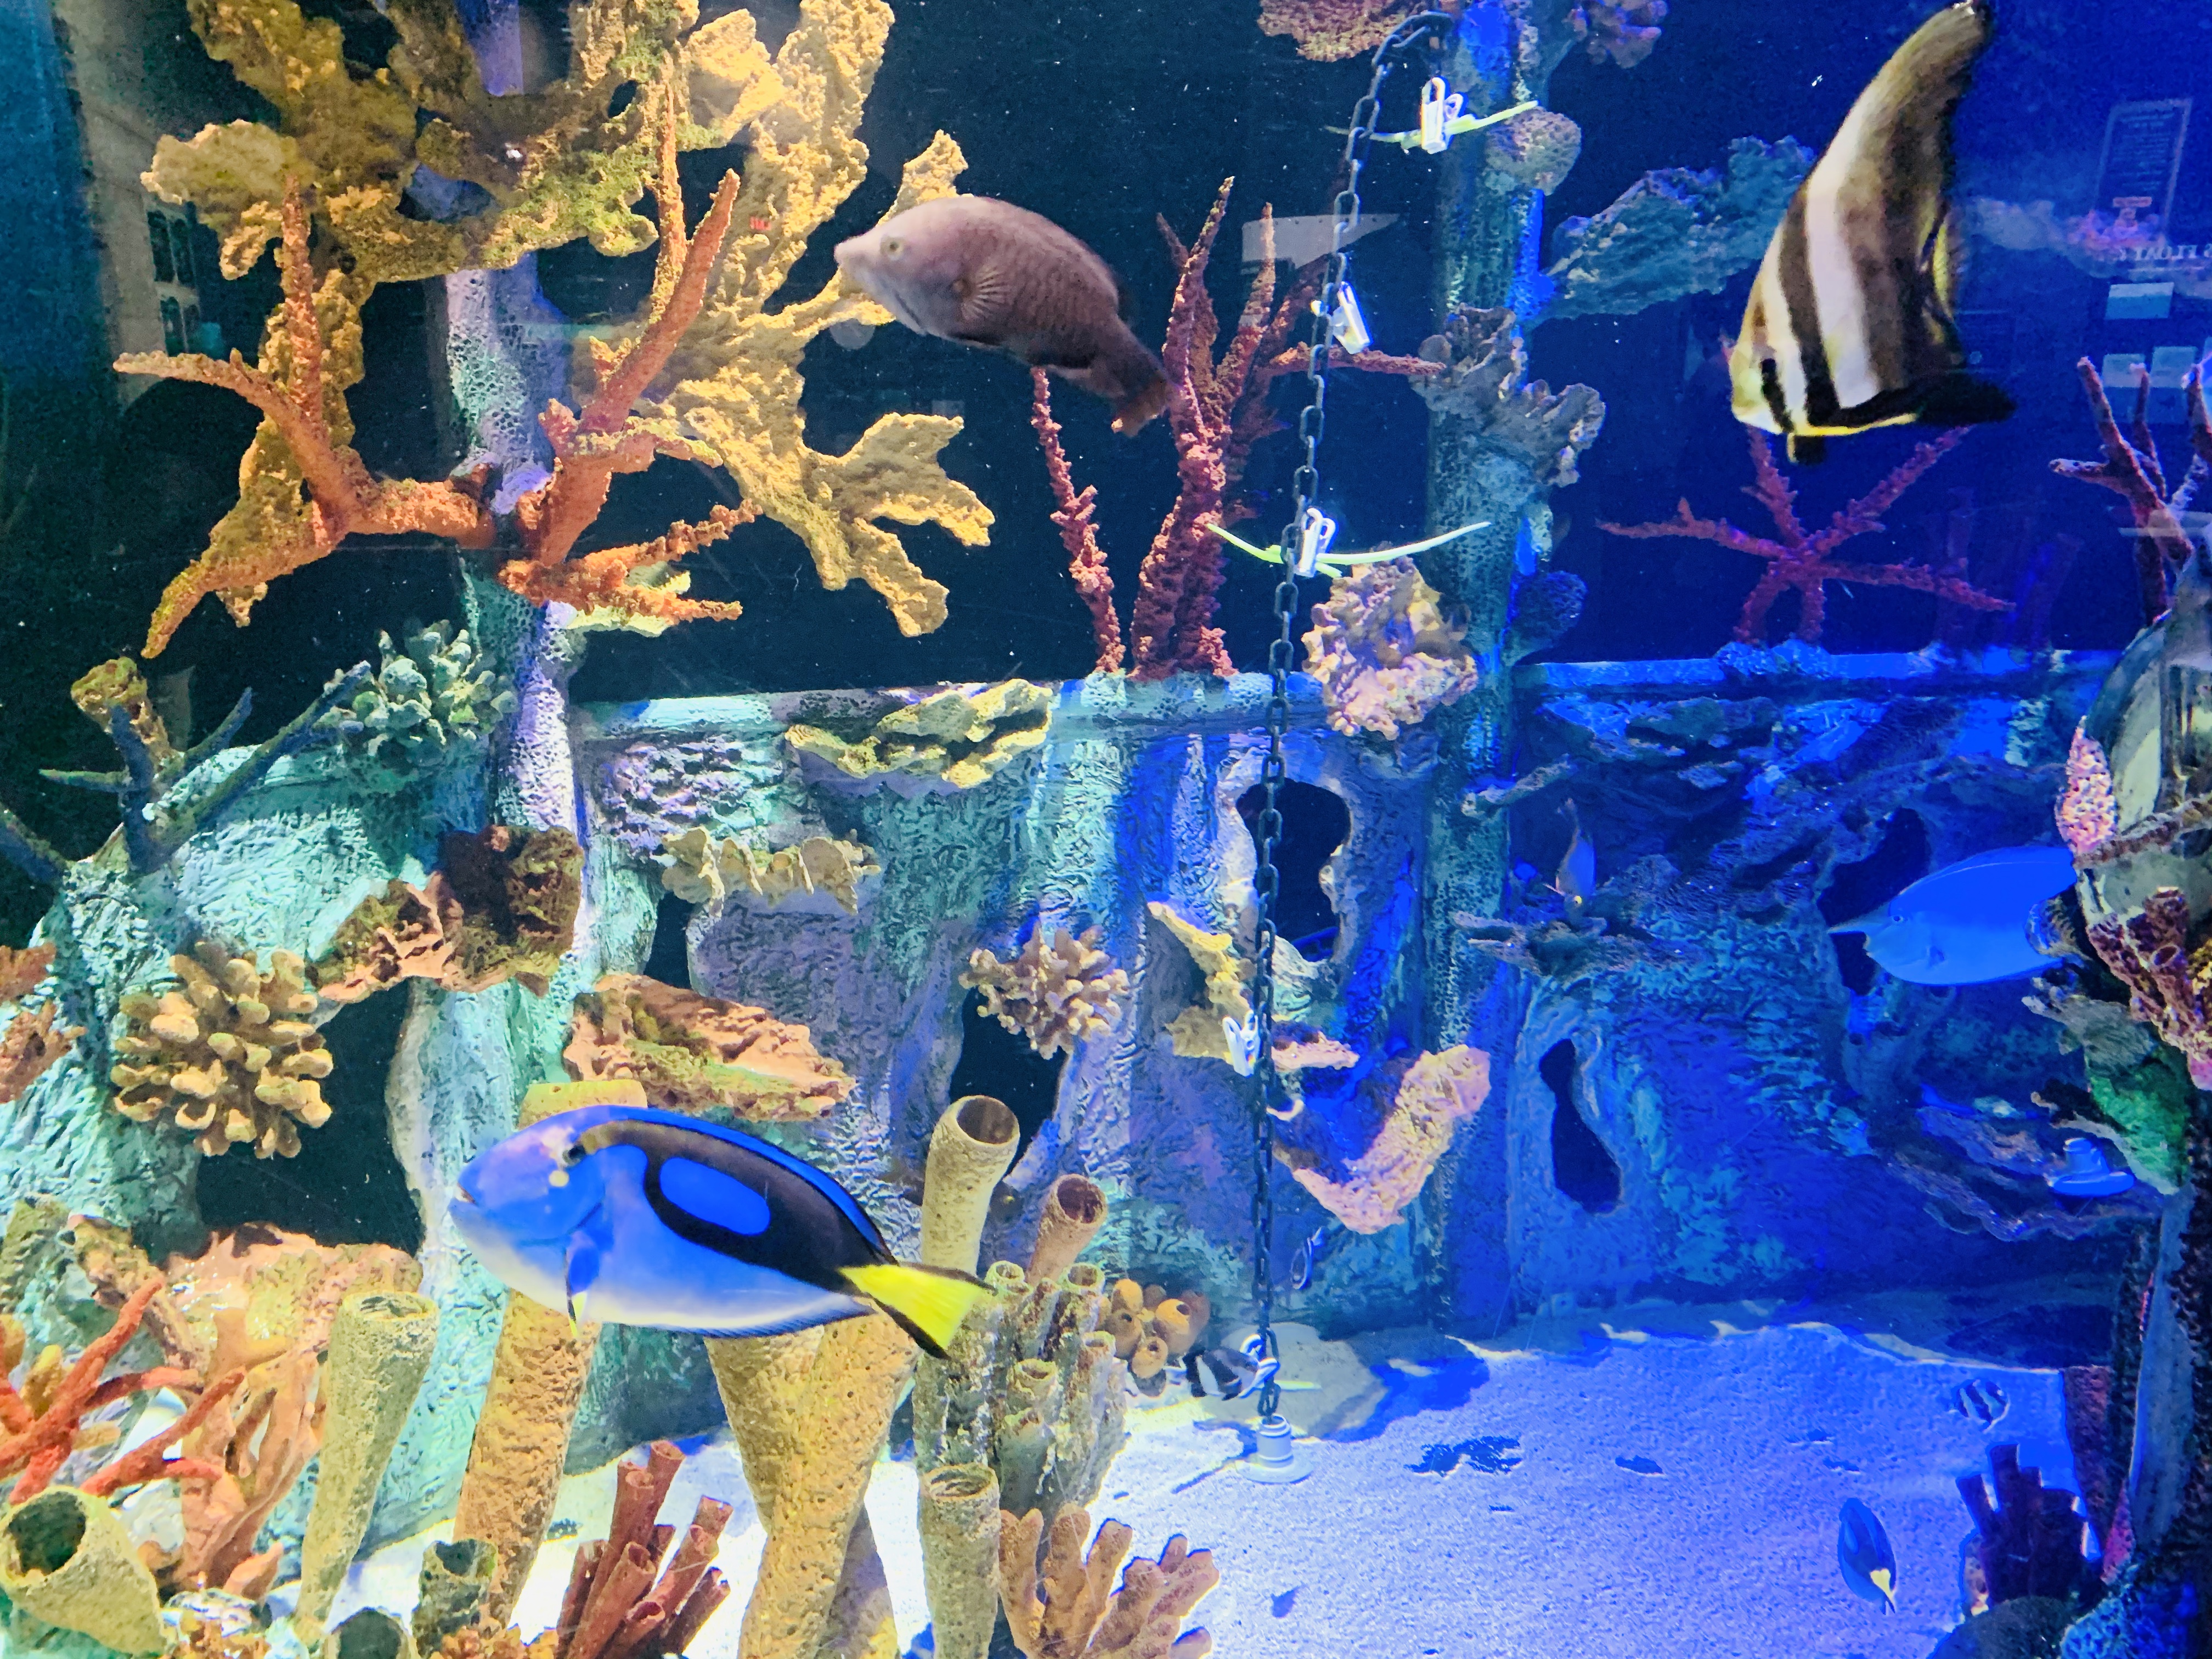 Read all about an experience at Duluth, MN's Great Lakes Aquarium from top U.S. family travel blog, Travel With A Plan!  They'll fill you in on what to expect while visiting and on whether or not a trip to the aquarium is worth the cost.  Click here now!  #duluthaquarium #duluthattractions #duluth #greatlakesaquarium #lakesuperior #duluthmnthingstodo